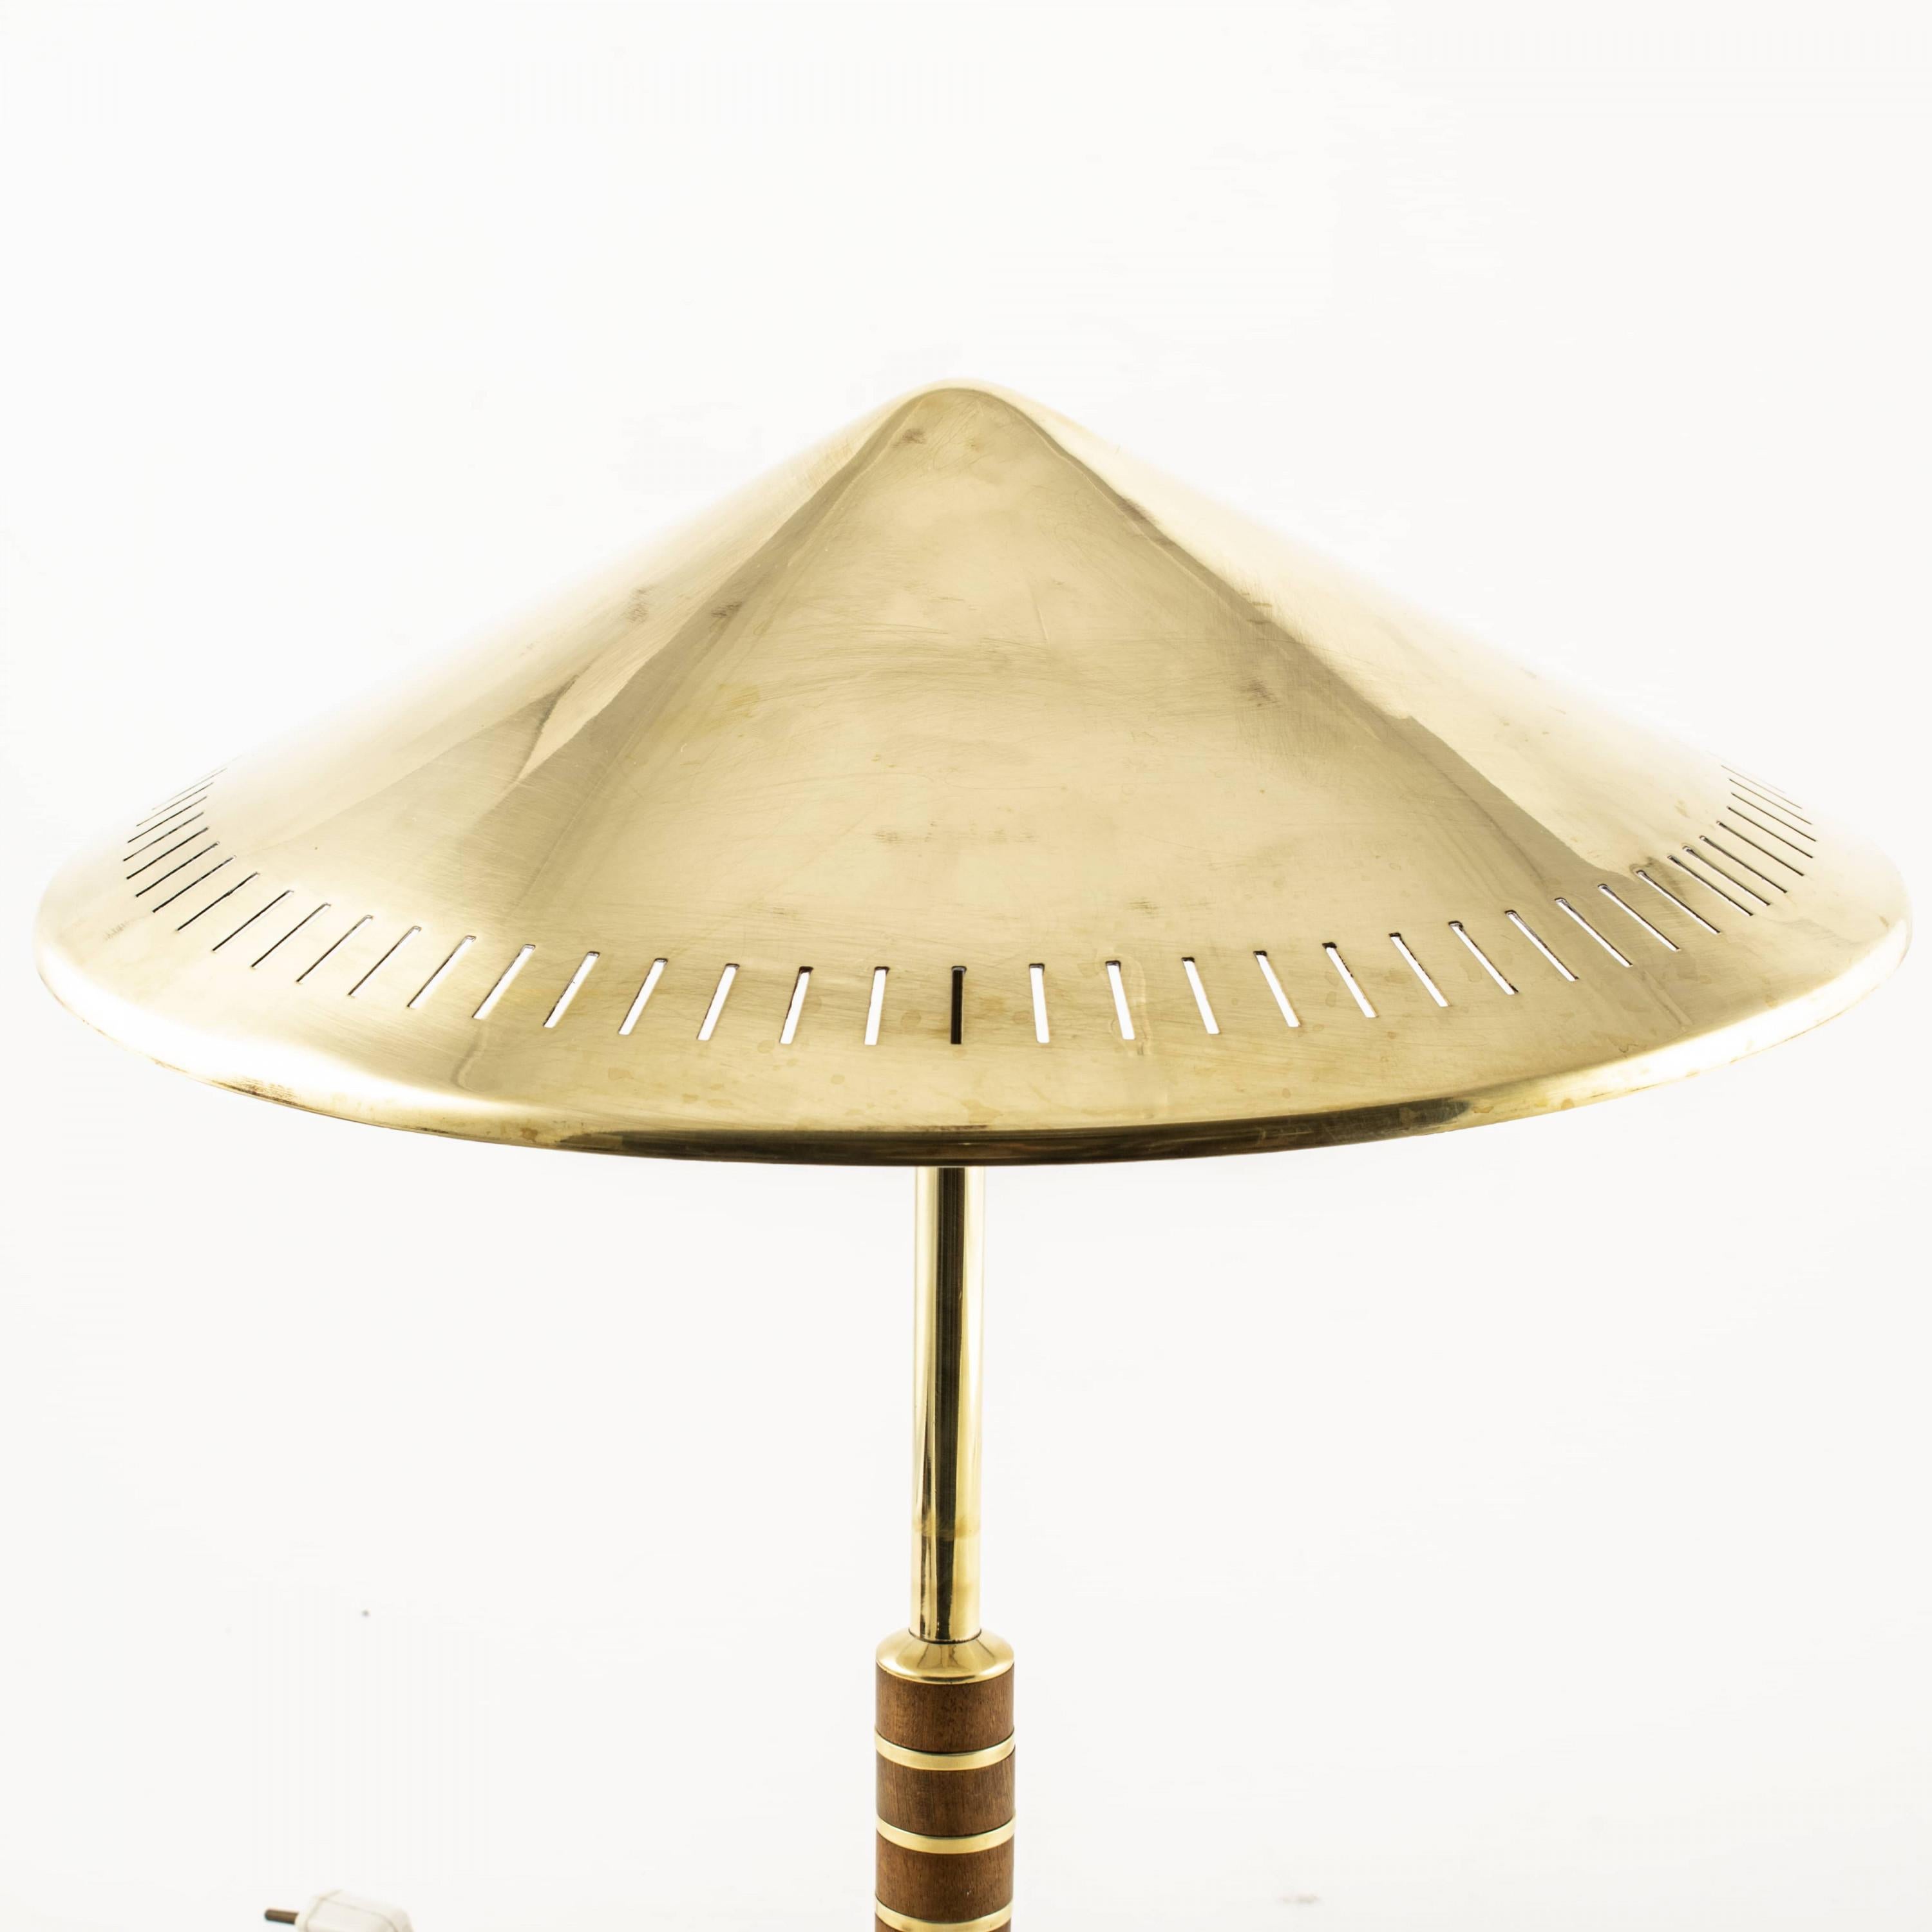 Danish brass table lamp from Lyfa 1956 designed by Bent Karlby. Model B146.
Solid brass with two-light sources, stem decorated with teak banding.

Untouched condition, can be polished shiny if desired.